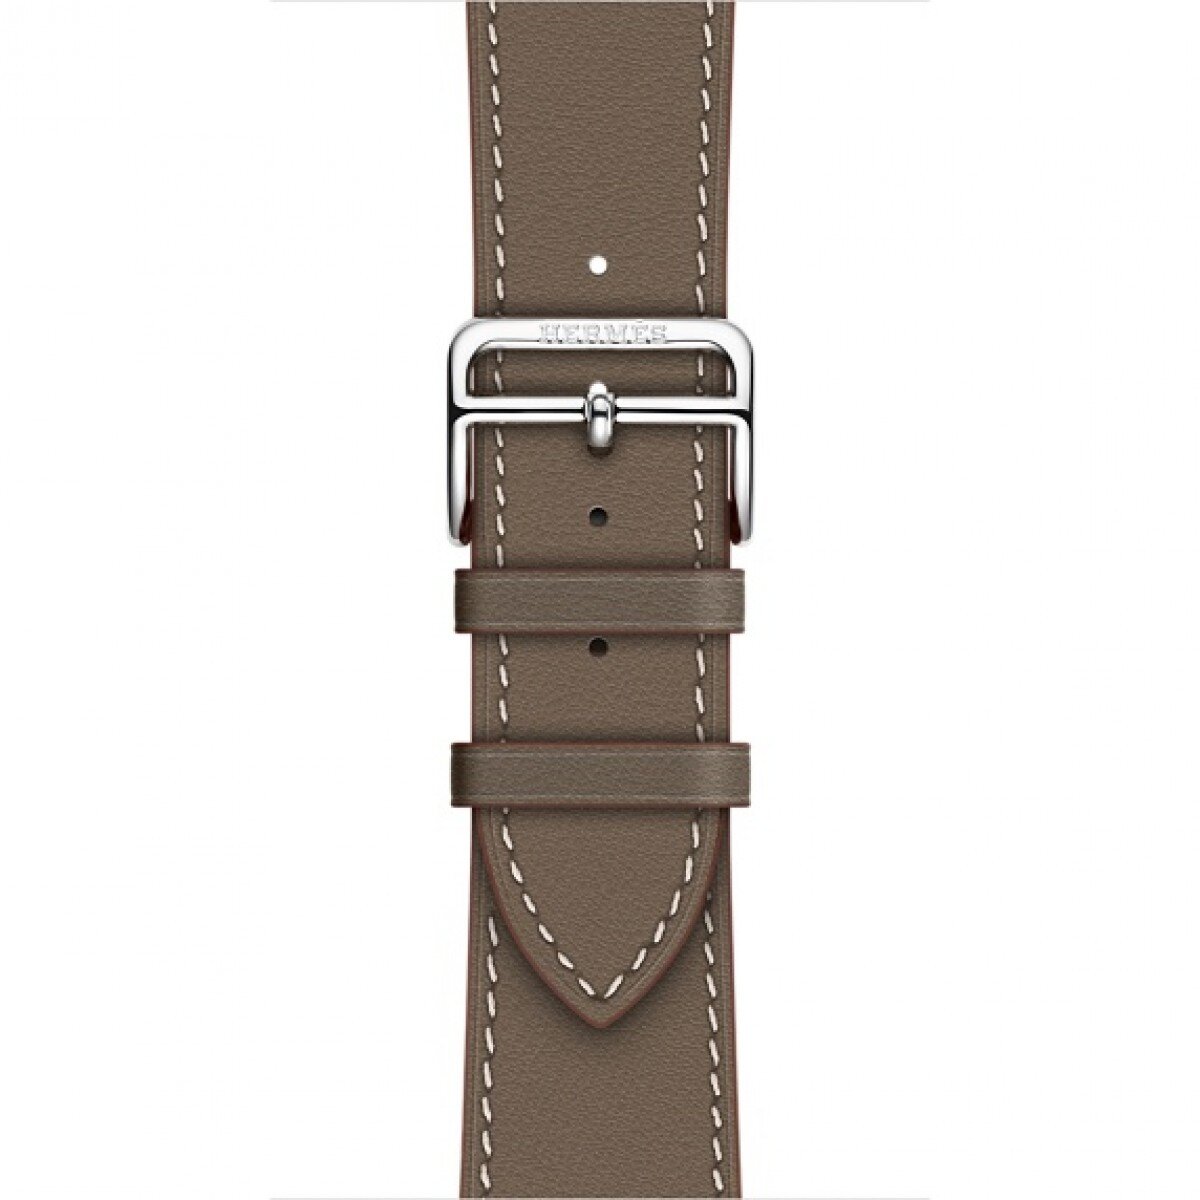 Buy Apple Watch Hermes Leather Single Tour Band online Worldwide